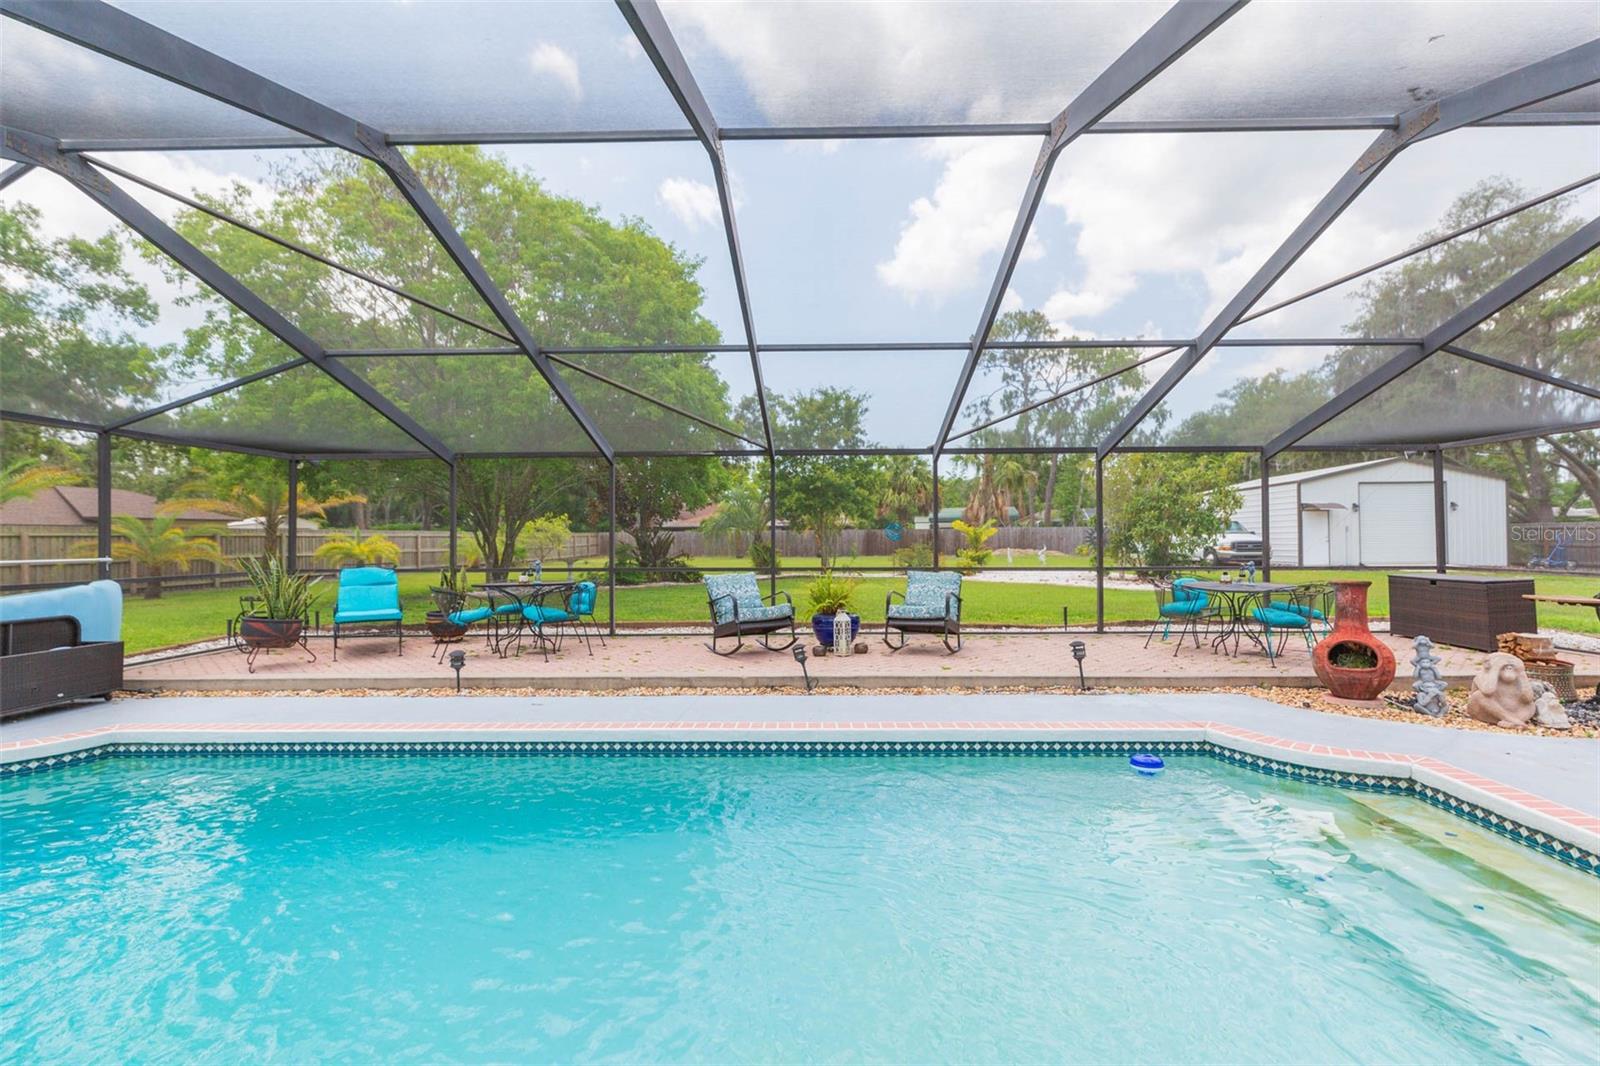 Pool is enclosed, inviting; a great place to entertain...